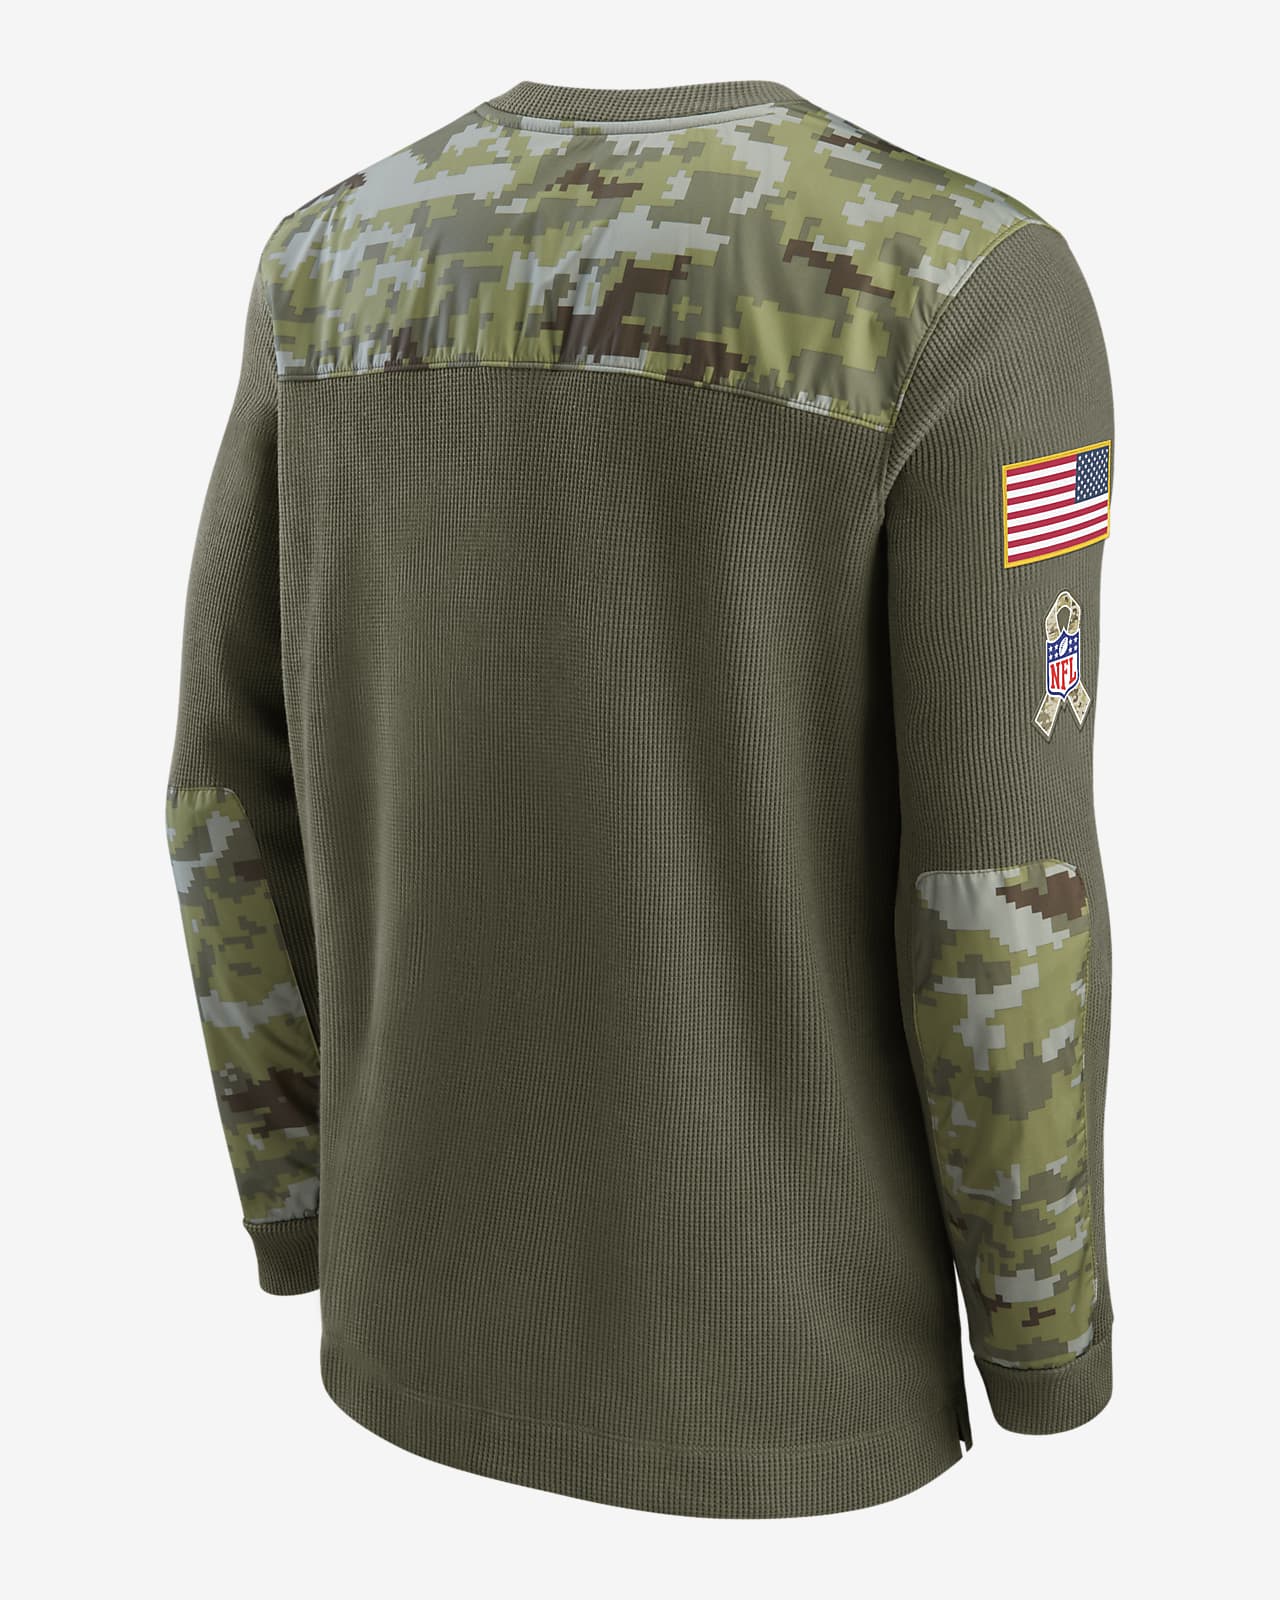 salute to service nfl t shirts